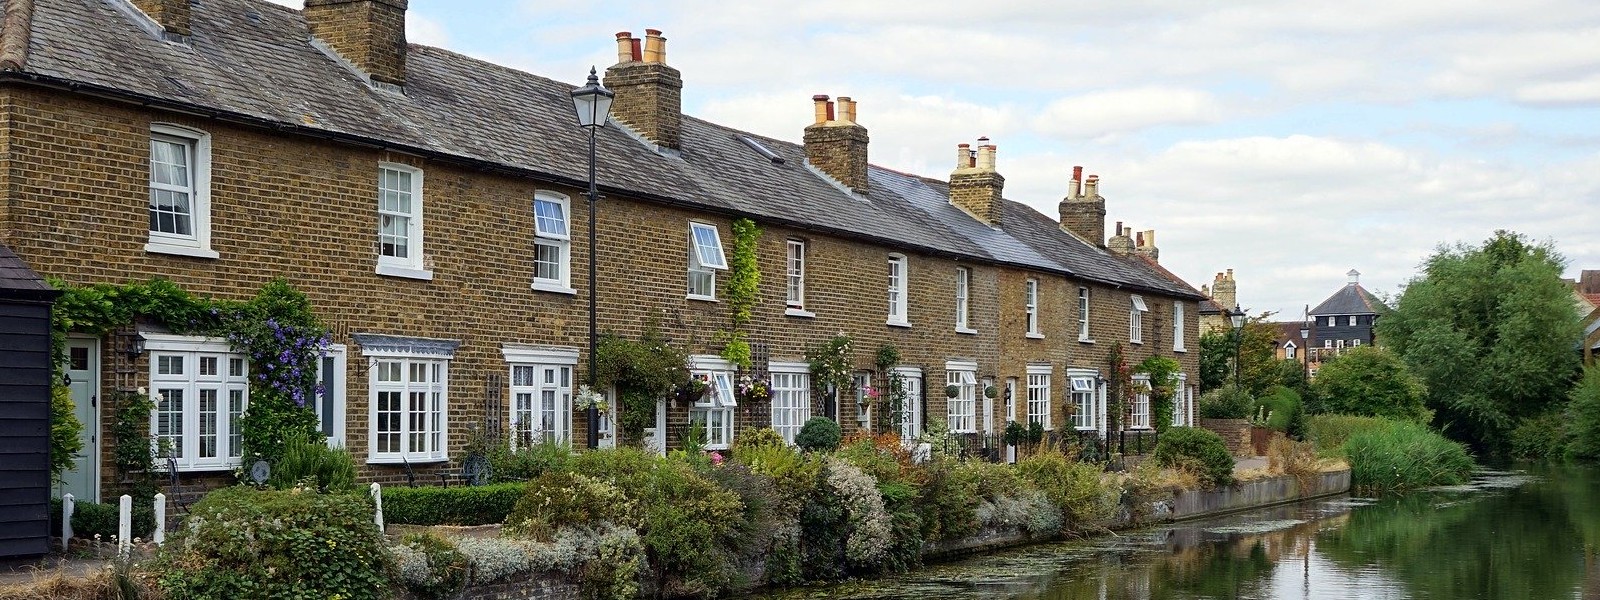 Row of old houses alongside the river